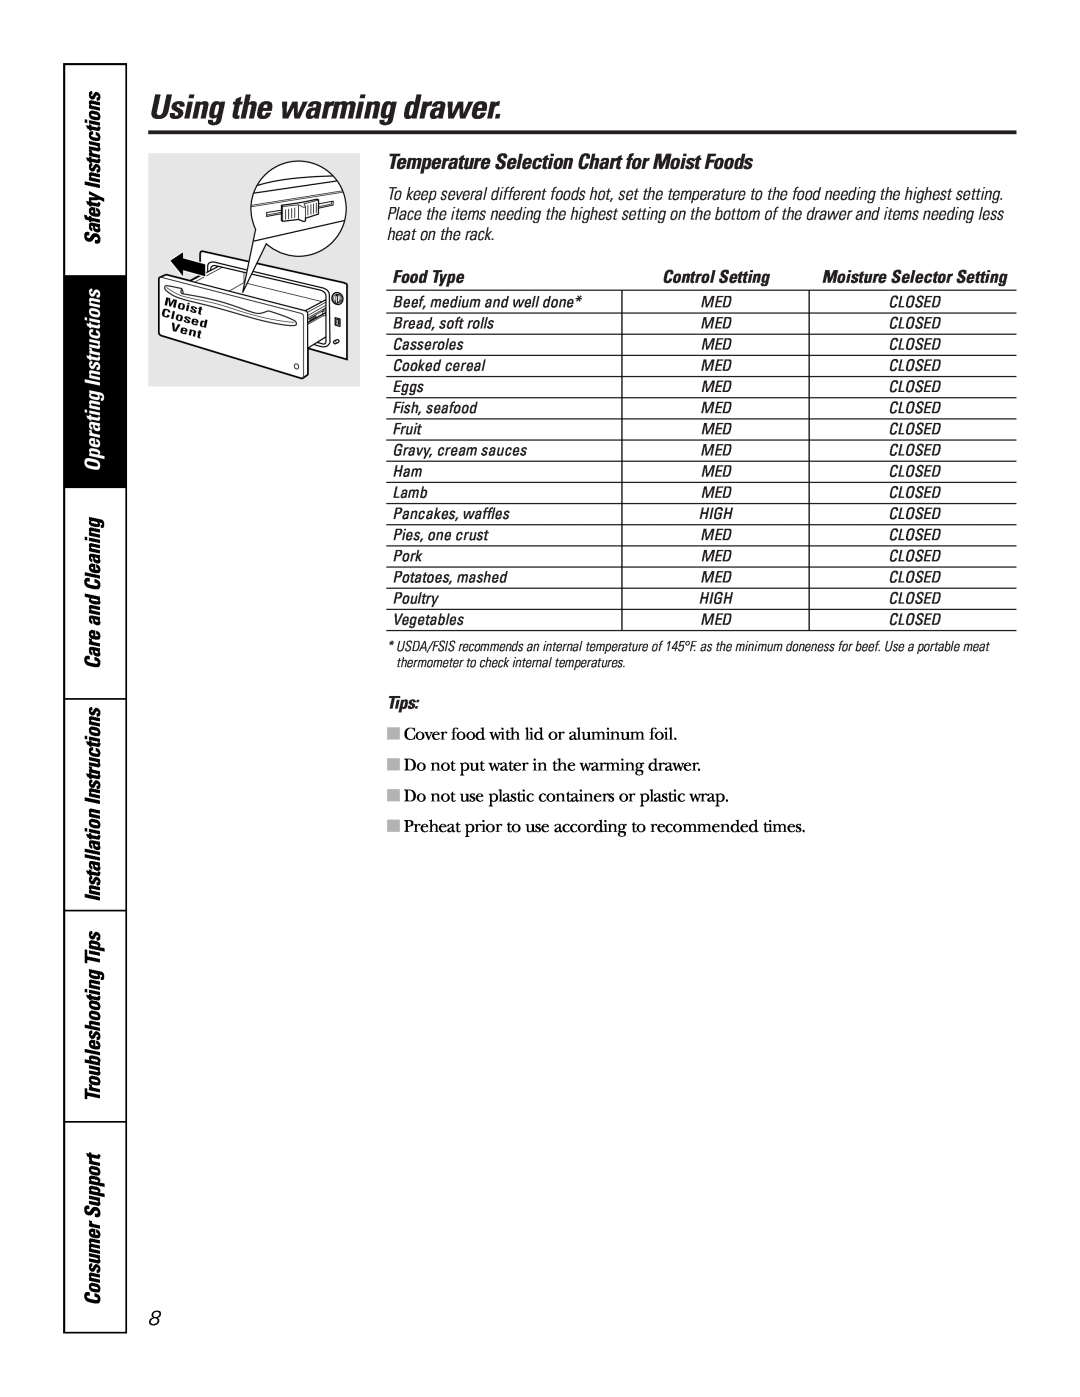 GE JKD915 owner manual Temperature Selection Chart for Moist Foods, Using the warming drawer, Food Type, Tips 